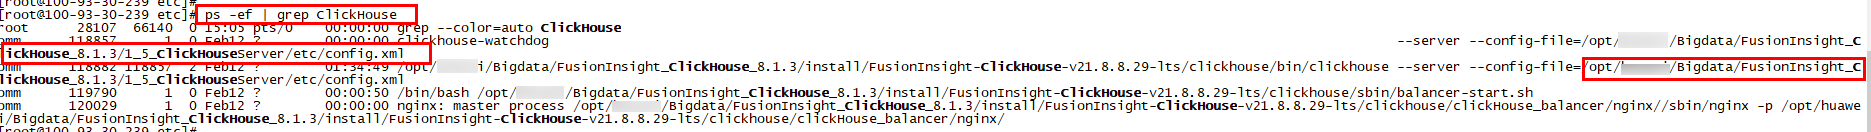 **Figure 4** Obtaining the configuration file directory of ClickHouseServer